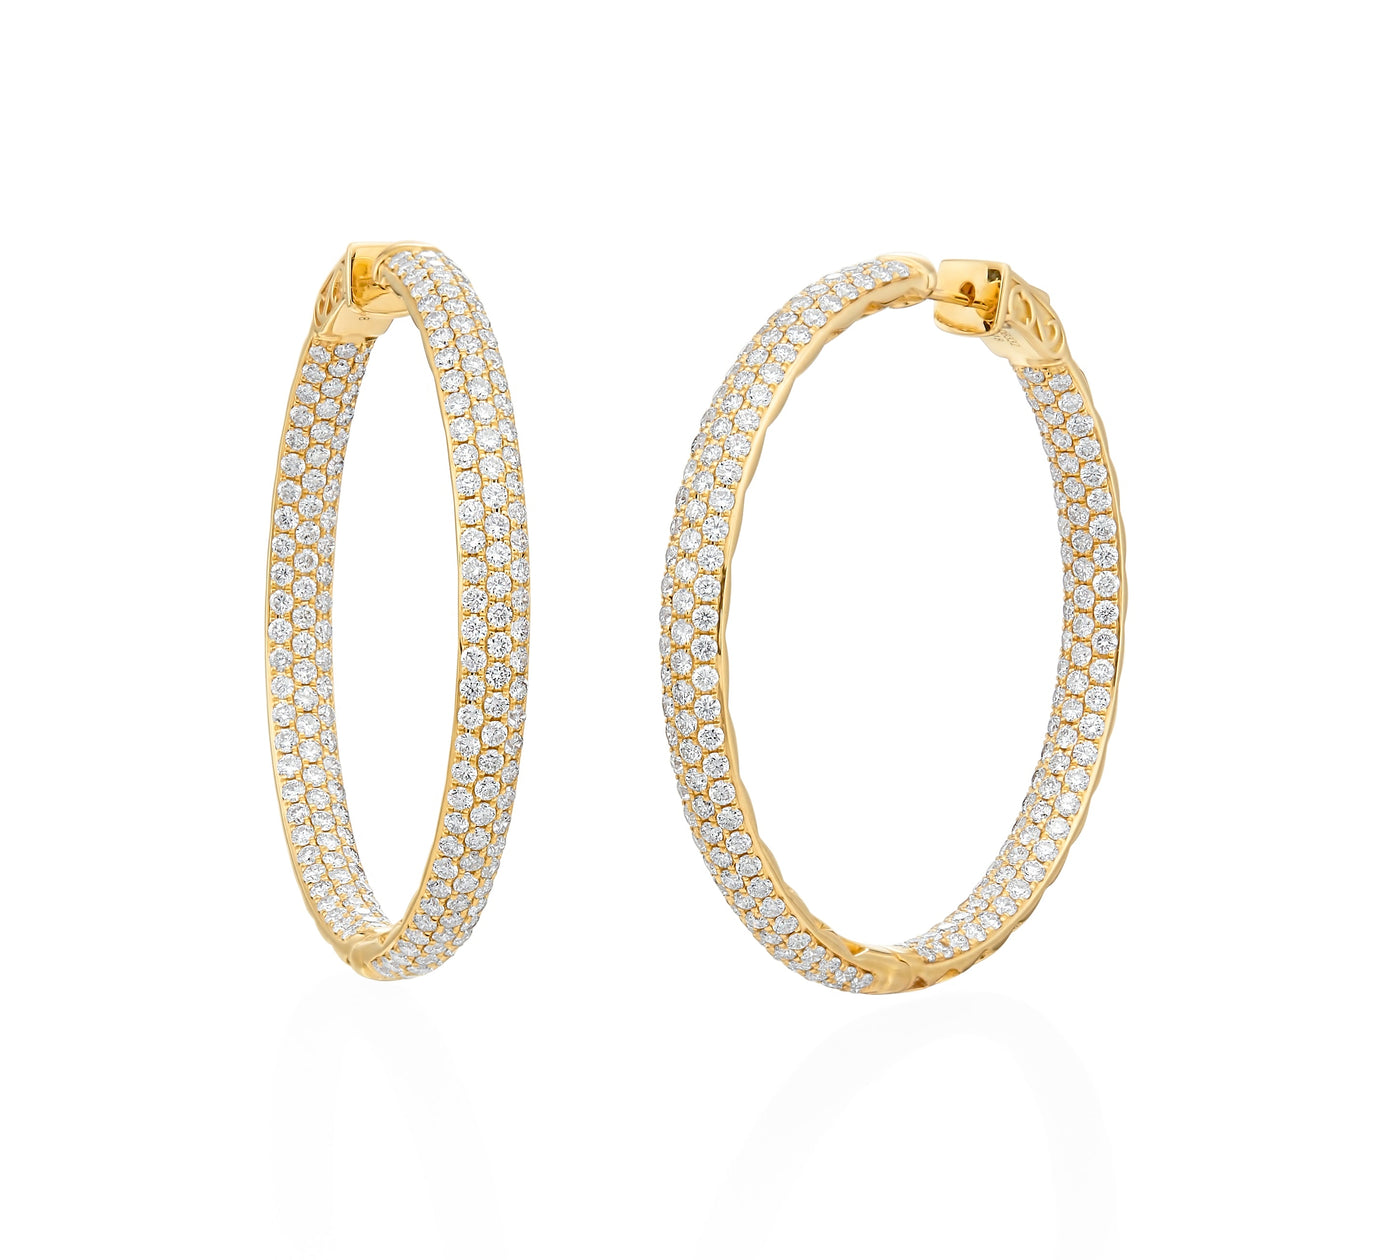 Large Yg Dia Pave Inside-Out Hoop Earrings